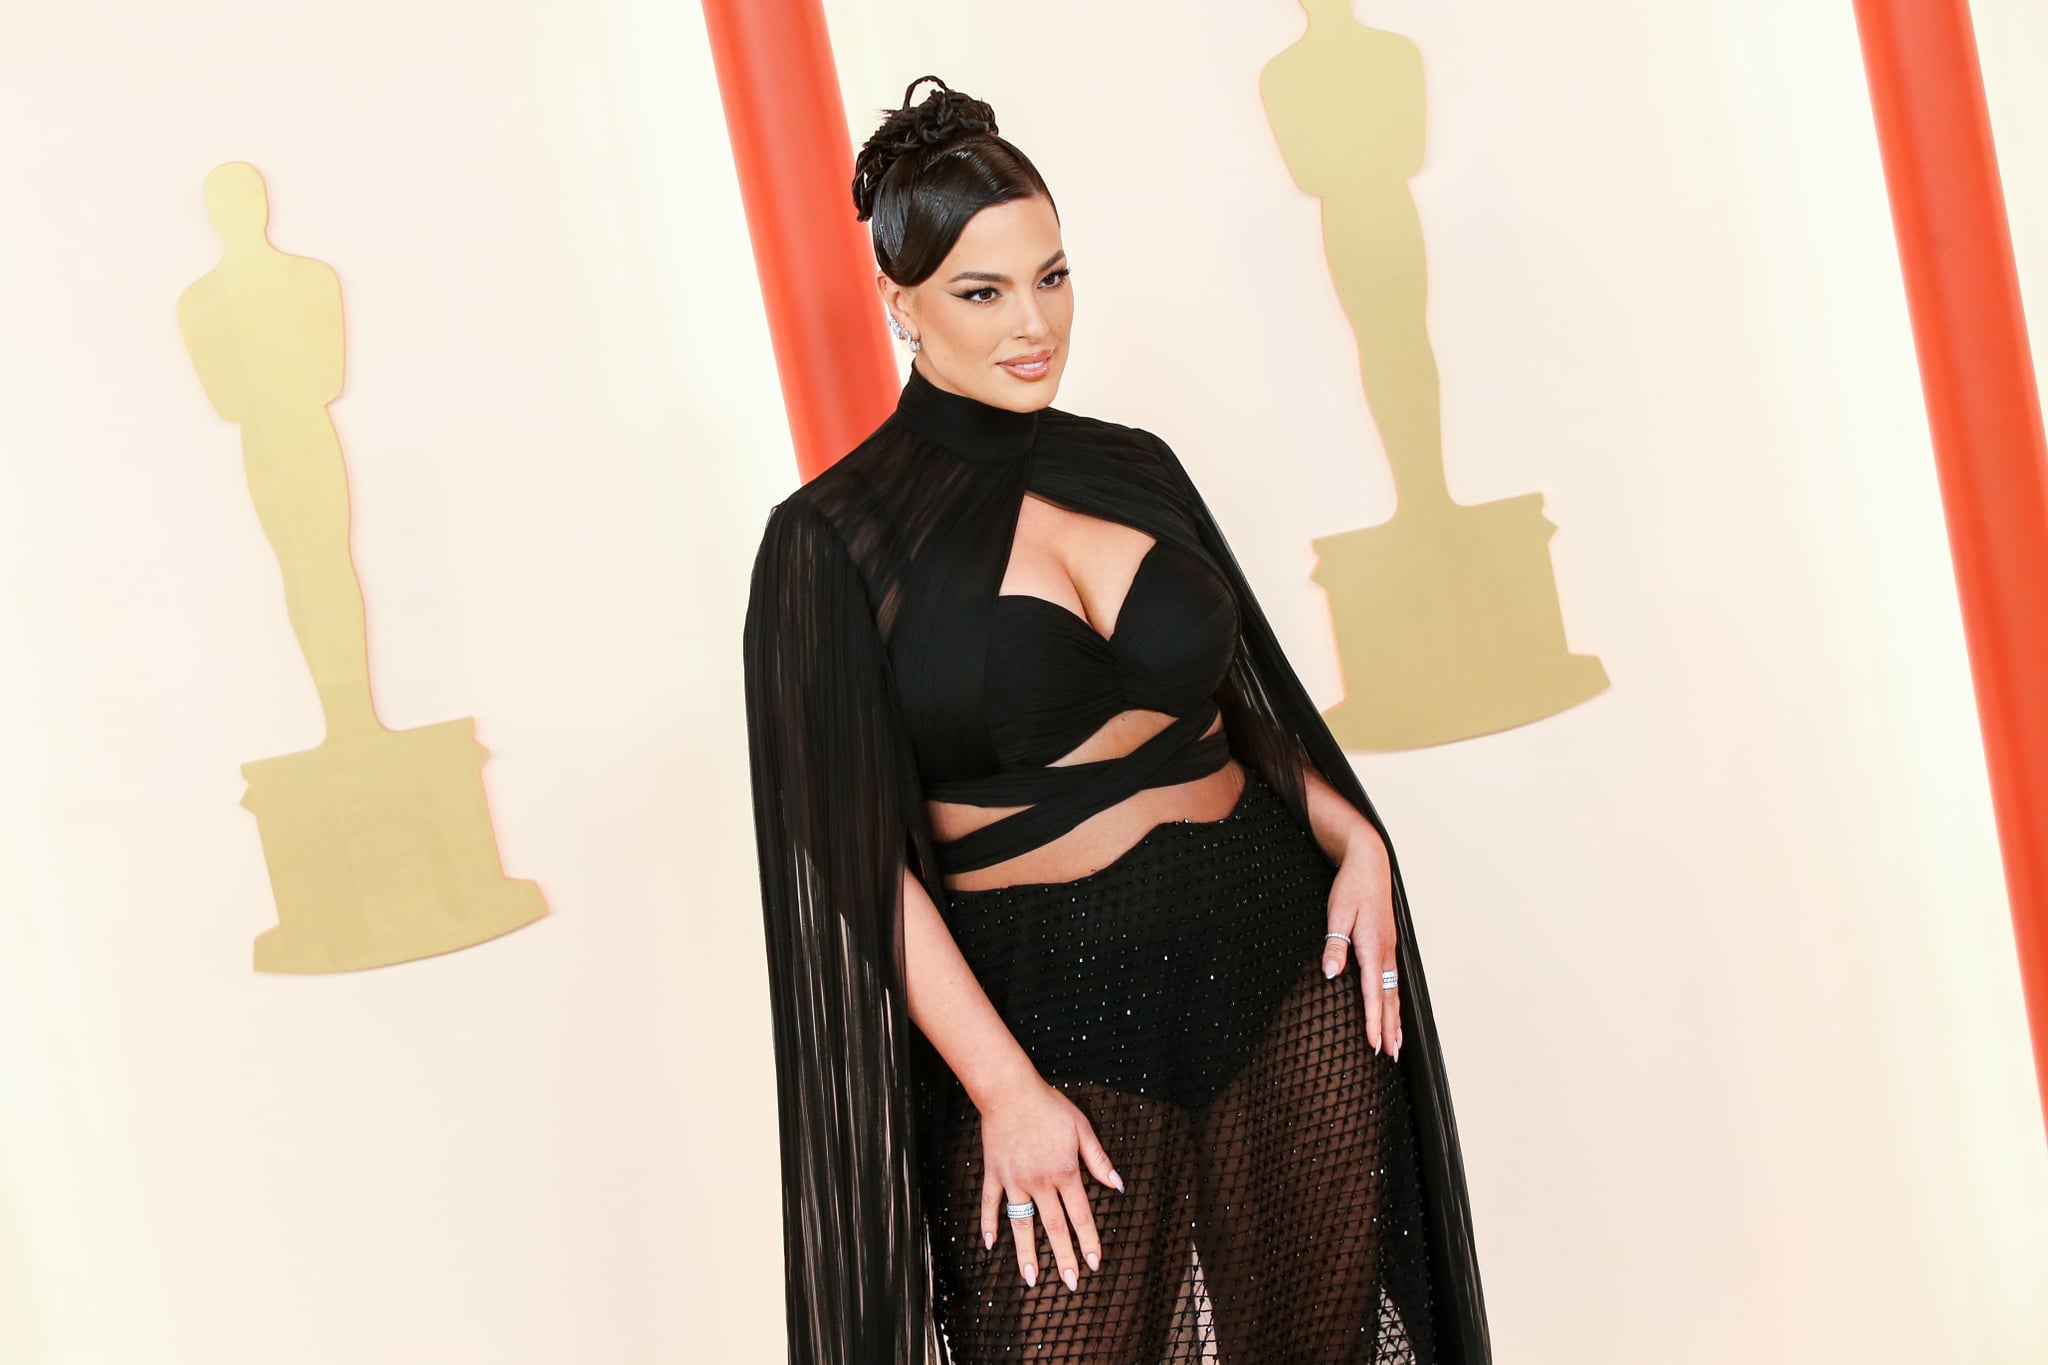 Ashley Graham at the 95th Annual Academy Awards held at Ovation Hollywood on March 12, 2023 in Los Angeles, California. (Photo by Lexie Moreland/WWD via Getty Images)